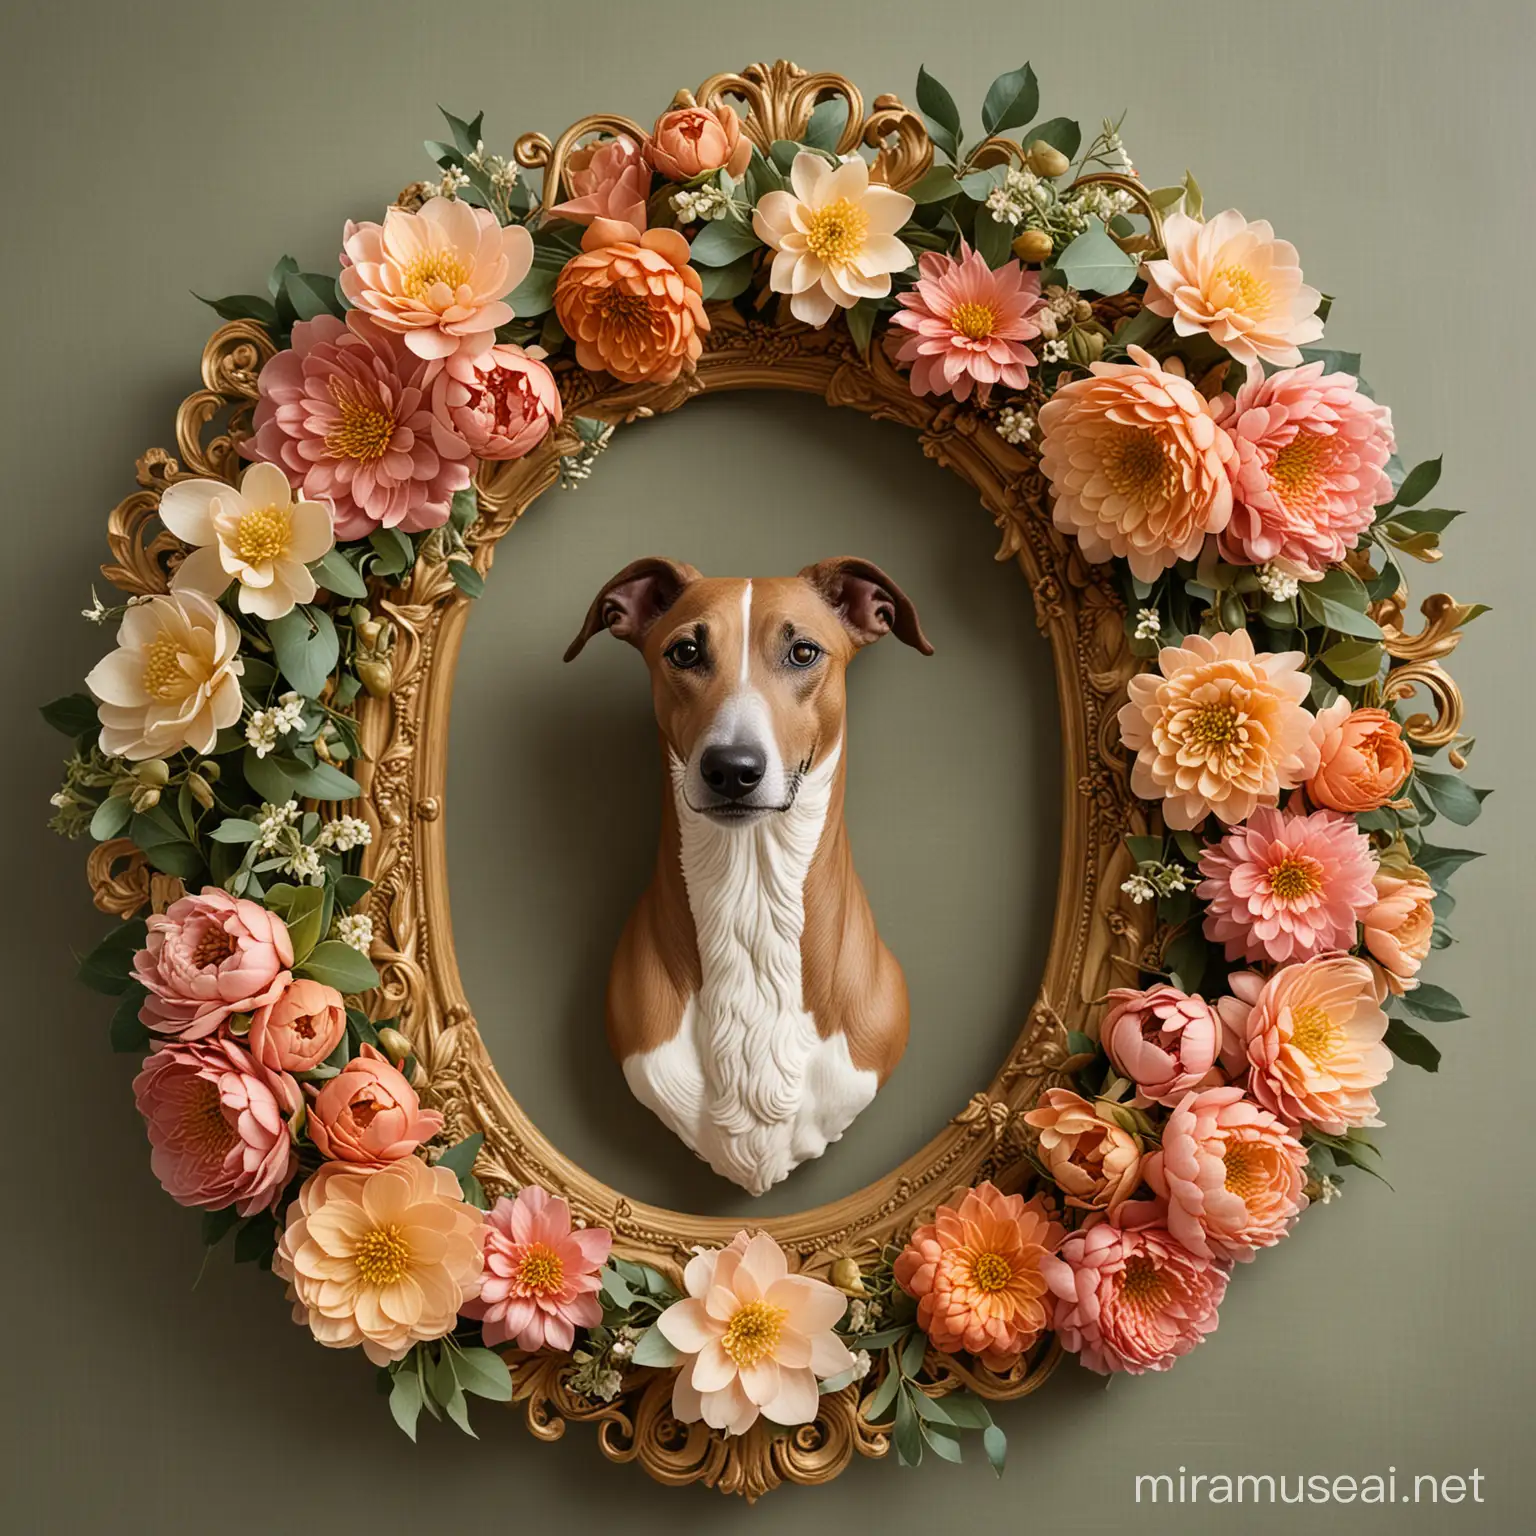 An oval gold picture frame with carved in flowers, draped in garlands of eucalyptus leaves and flowers, hellebore flowers, peony flowers and dahlia flowers. A bust of a brindle colored greyhound surrounded by chinese paper lanterns is inside the frame. 